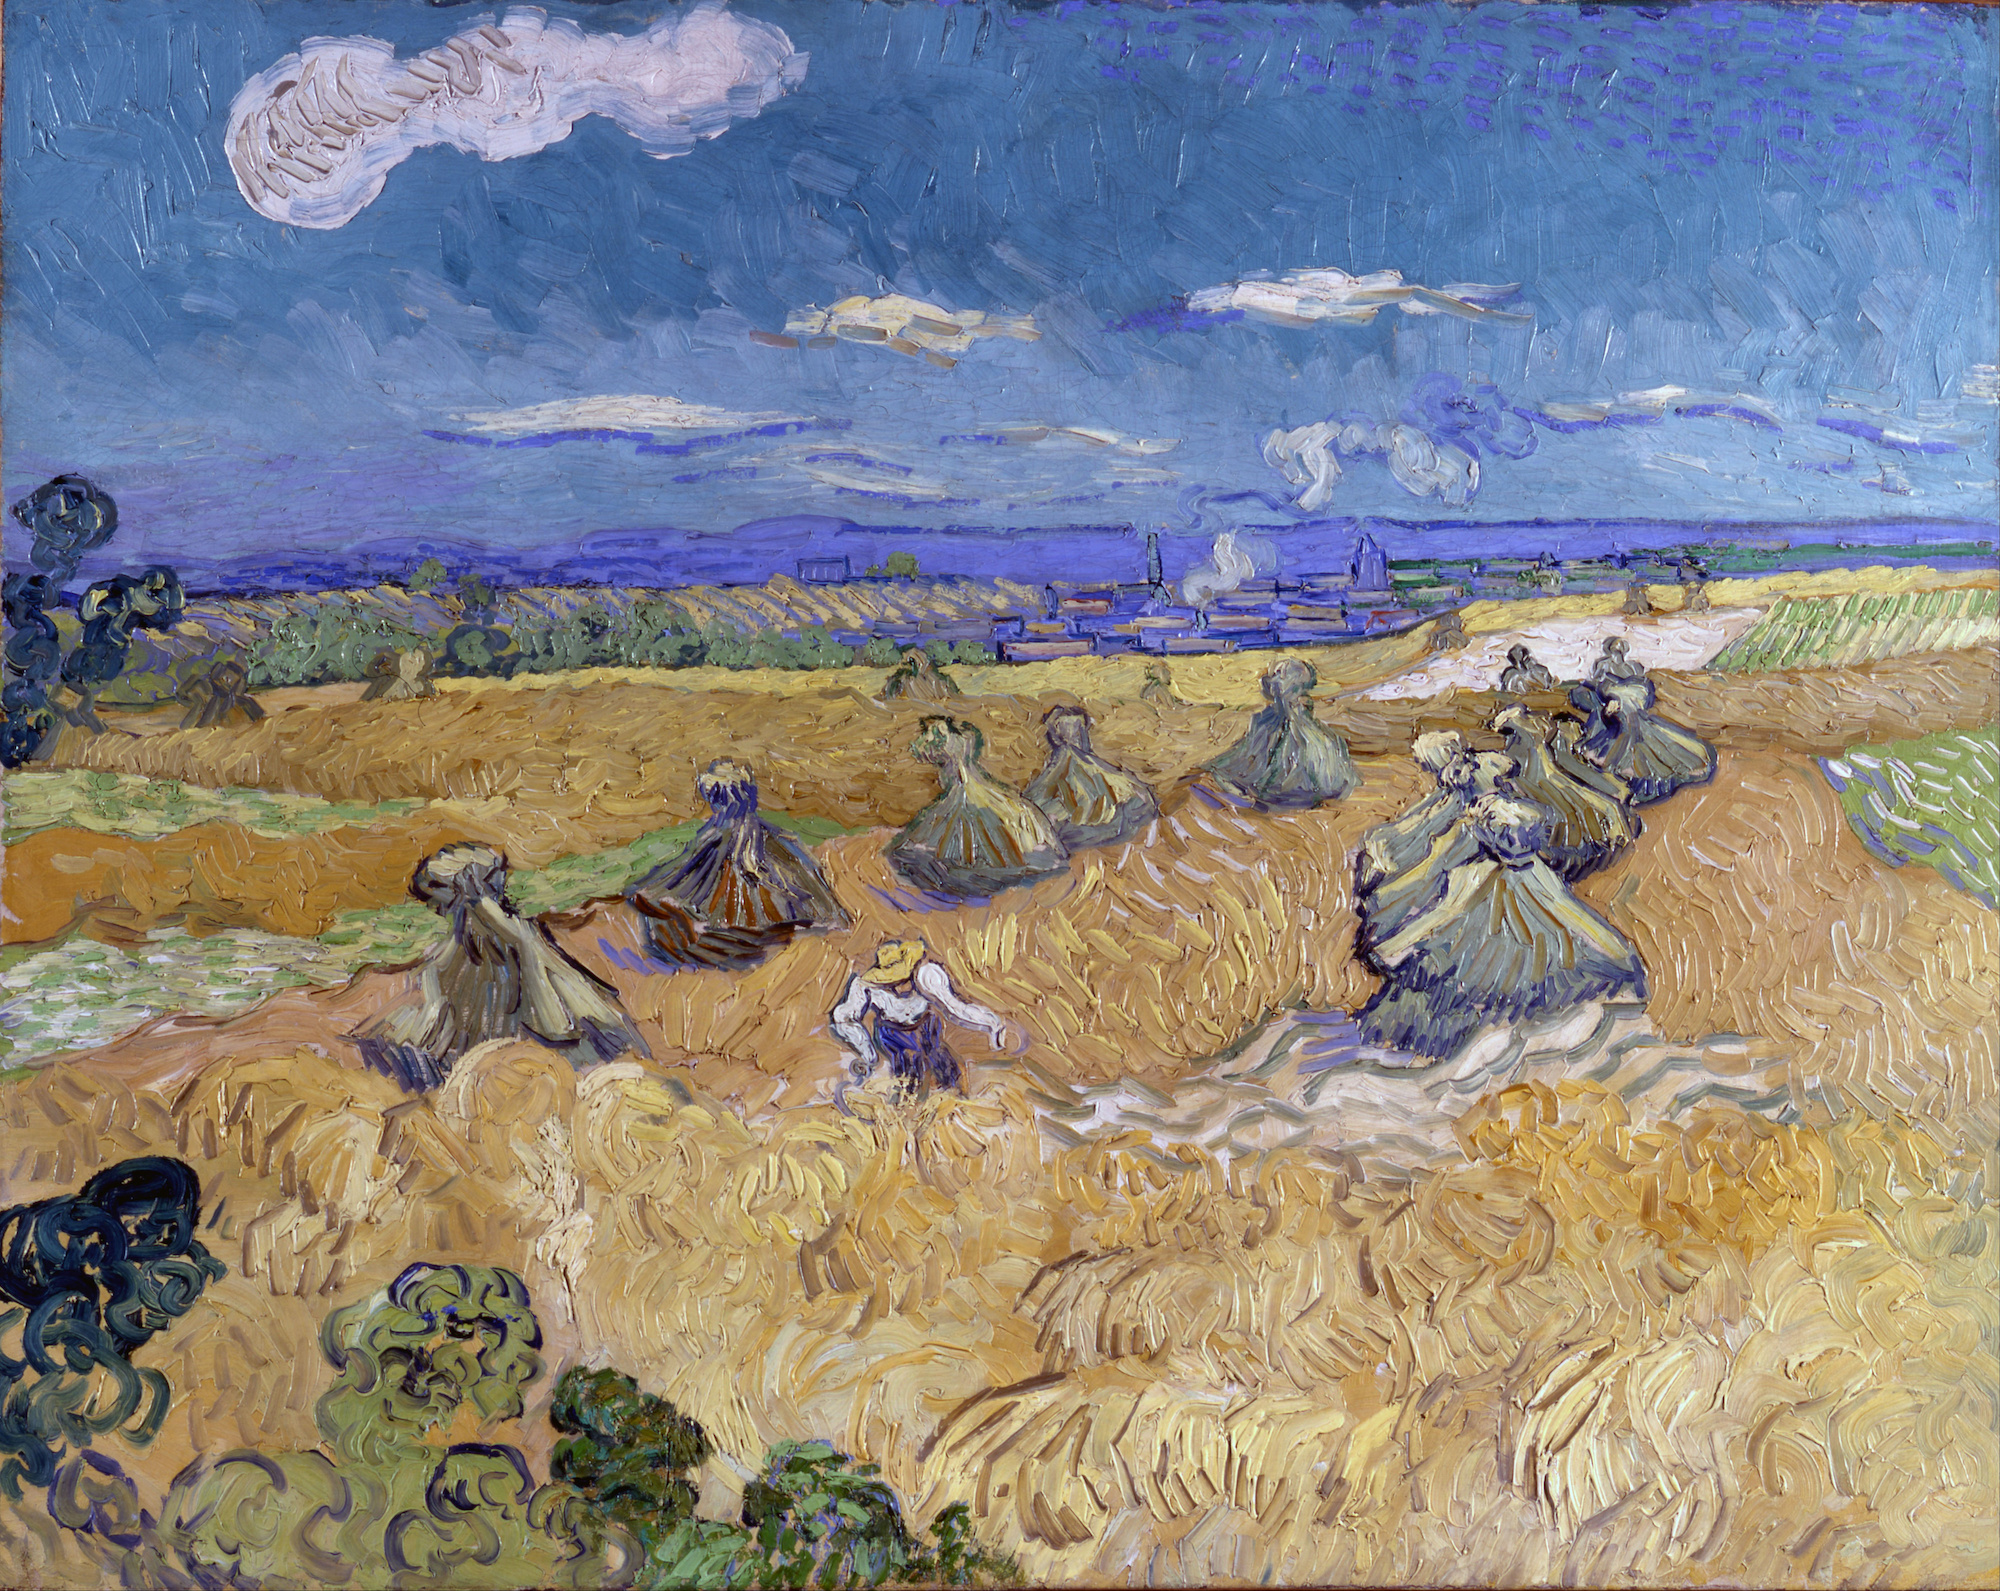 Wheat Fields with Reaper, Auvers by Vincent van Gogh - 1890 - 73.6 x 93 cm Toledo Museum of Art